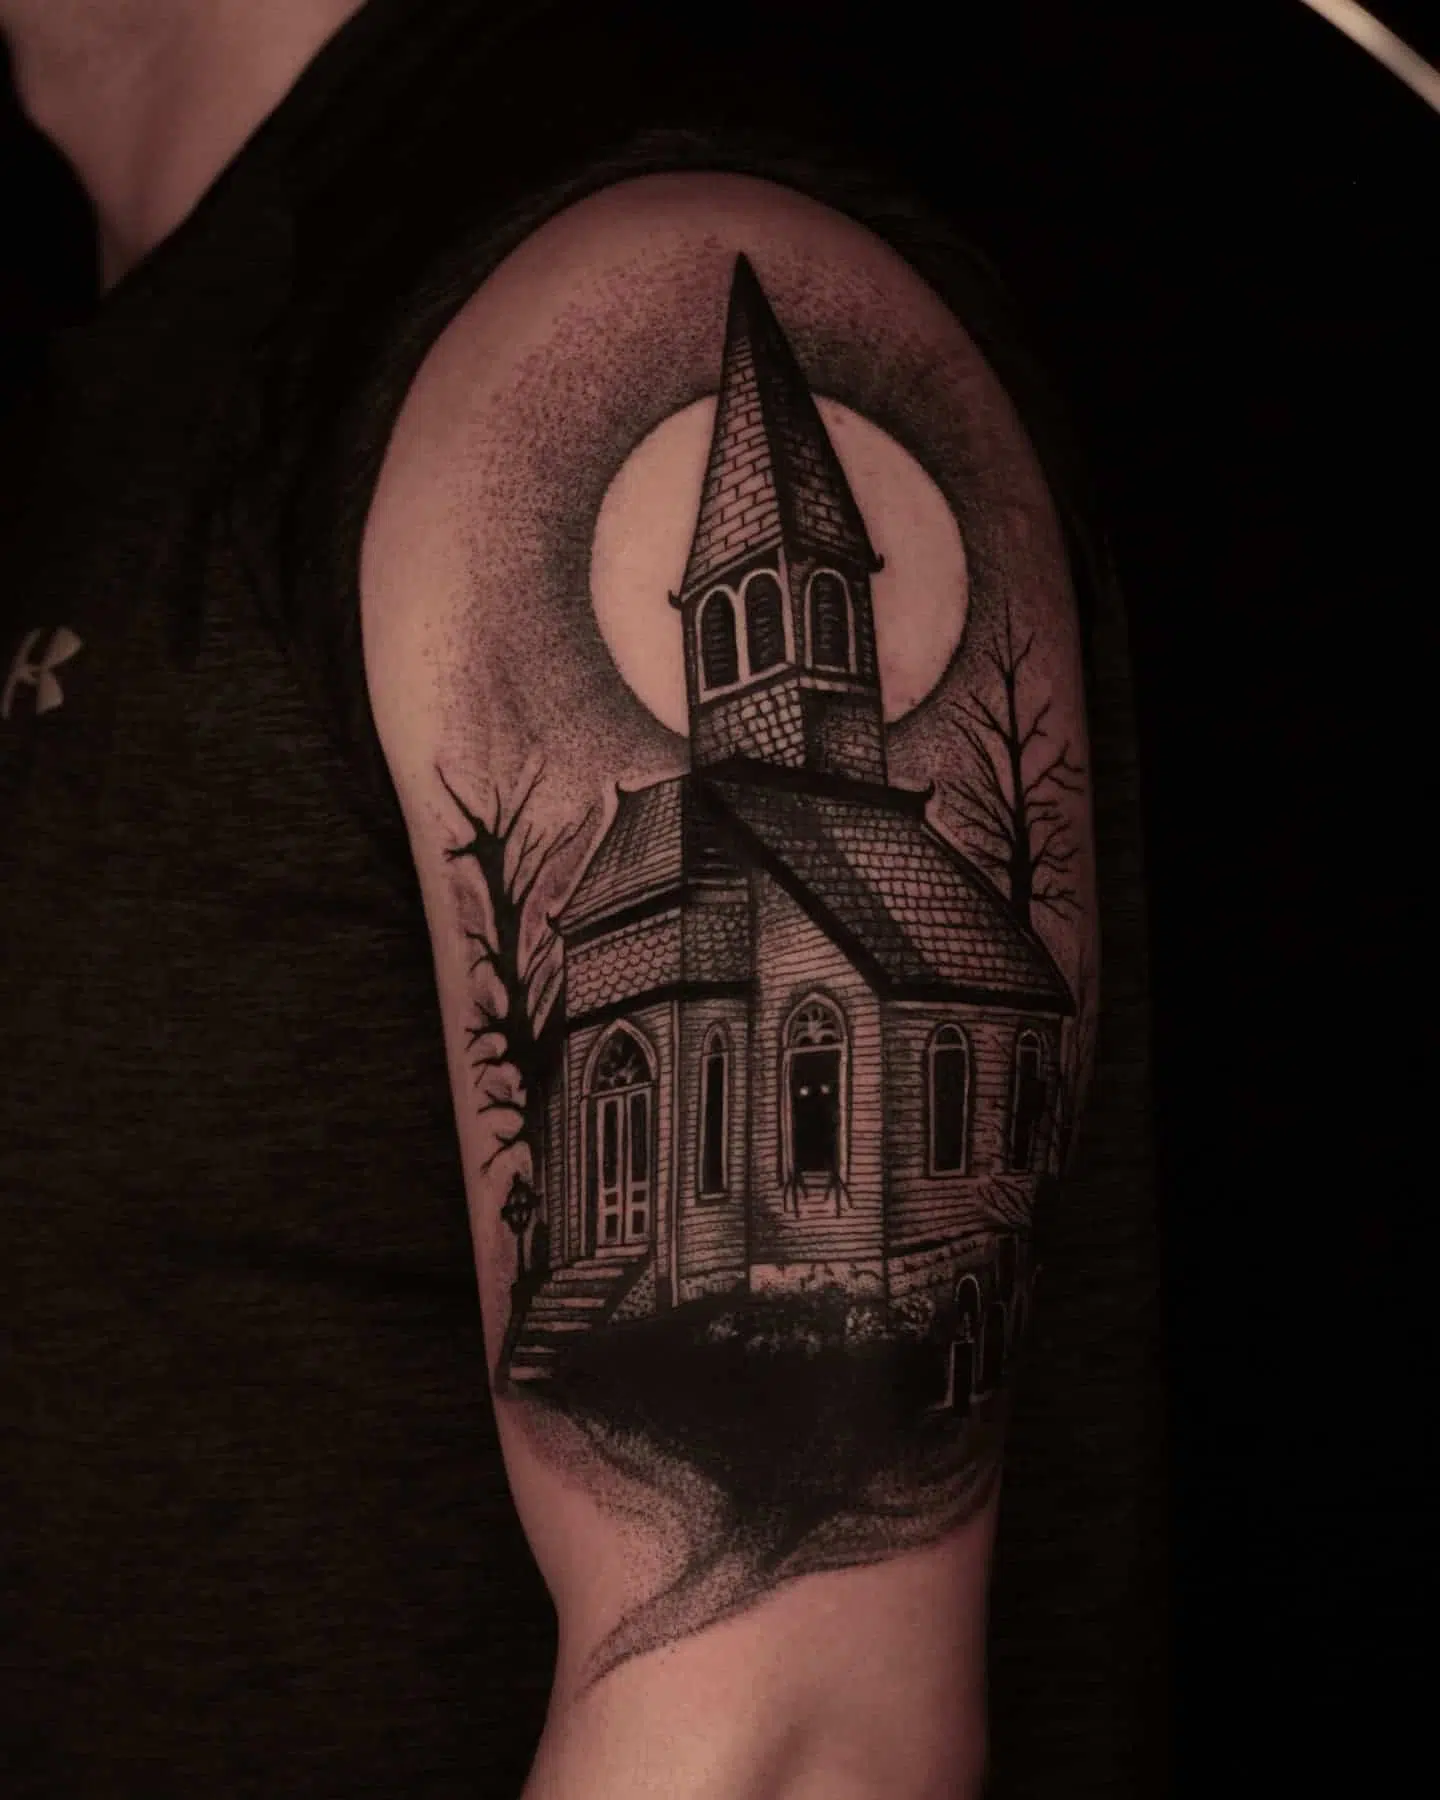 Spooky hoose by Liz from a wee while ago!

lizminellitattoo               